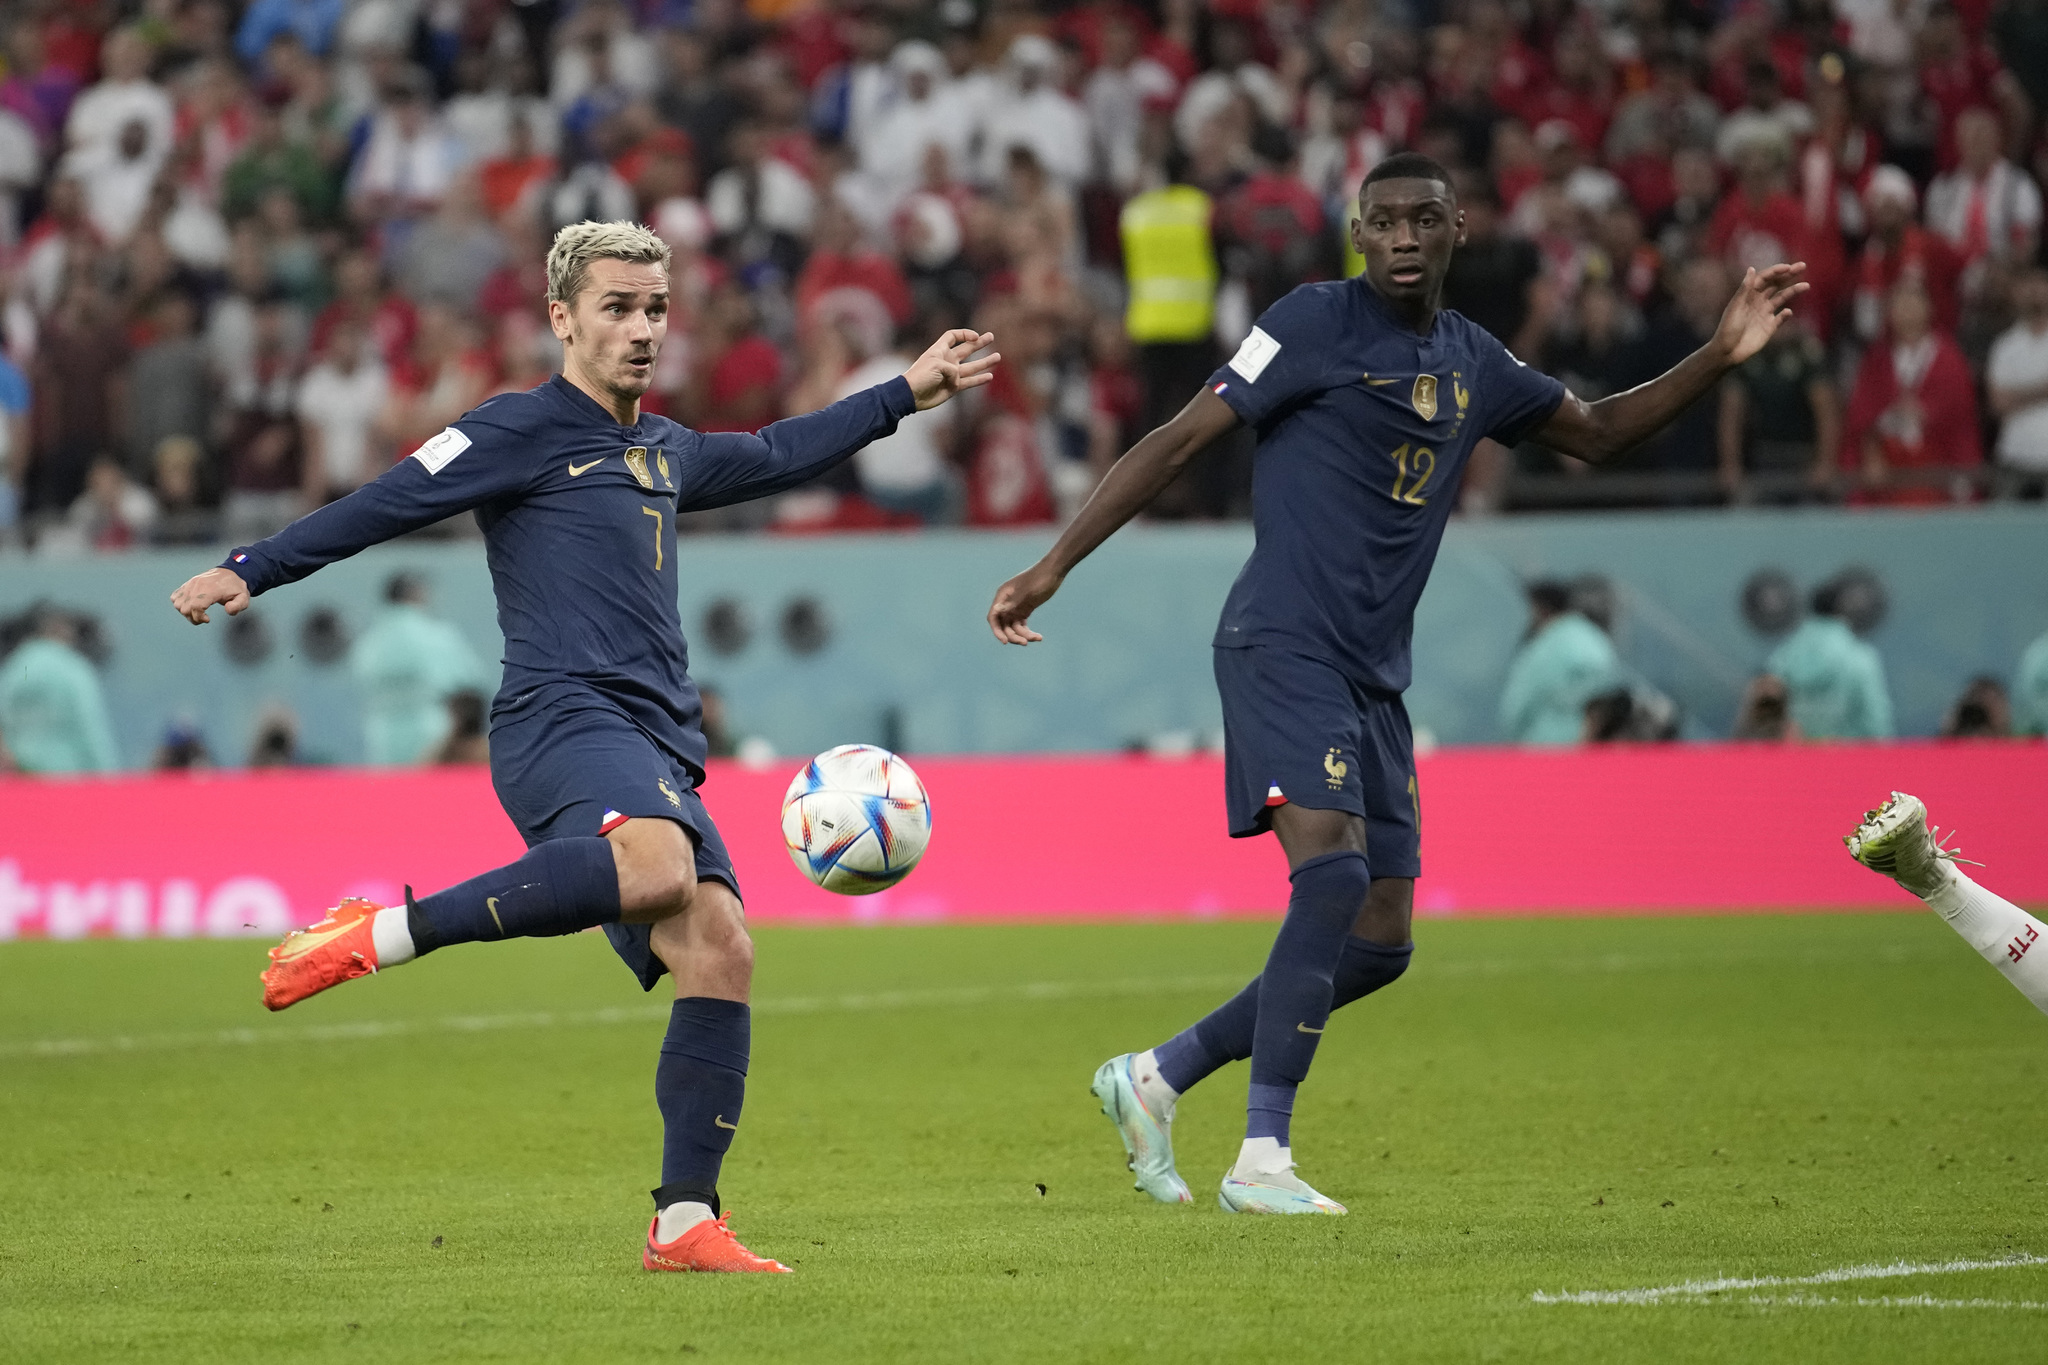  lt;HIT gt;France lt;/HIT gt;'s Antoine Griezmann kicks the ball to score his side opening goal that was later disallowed during the World Cup group D soccer match between Tunisia and  lt;HIT gt;France lt;/HIT gt; at the Education City Stadium in Al Rayyan , Qatar, Wednesday, Nov. 30, 2022. (AP Photo/Christophe Ena)